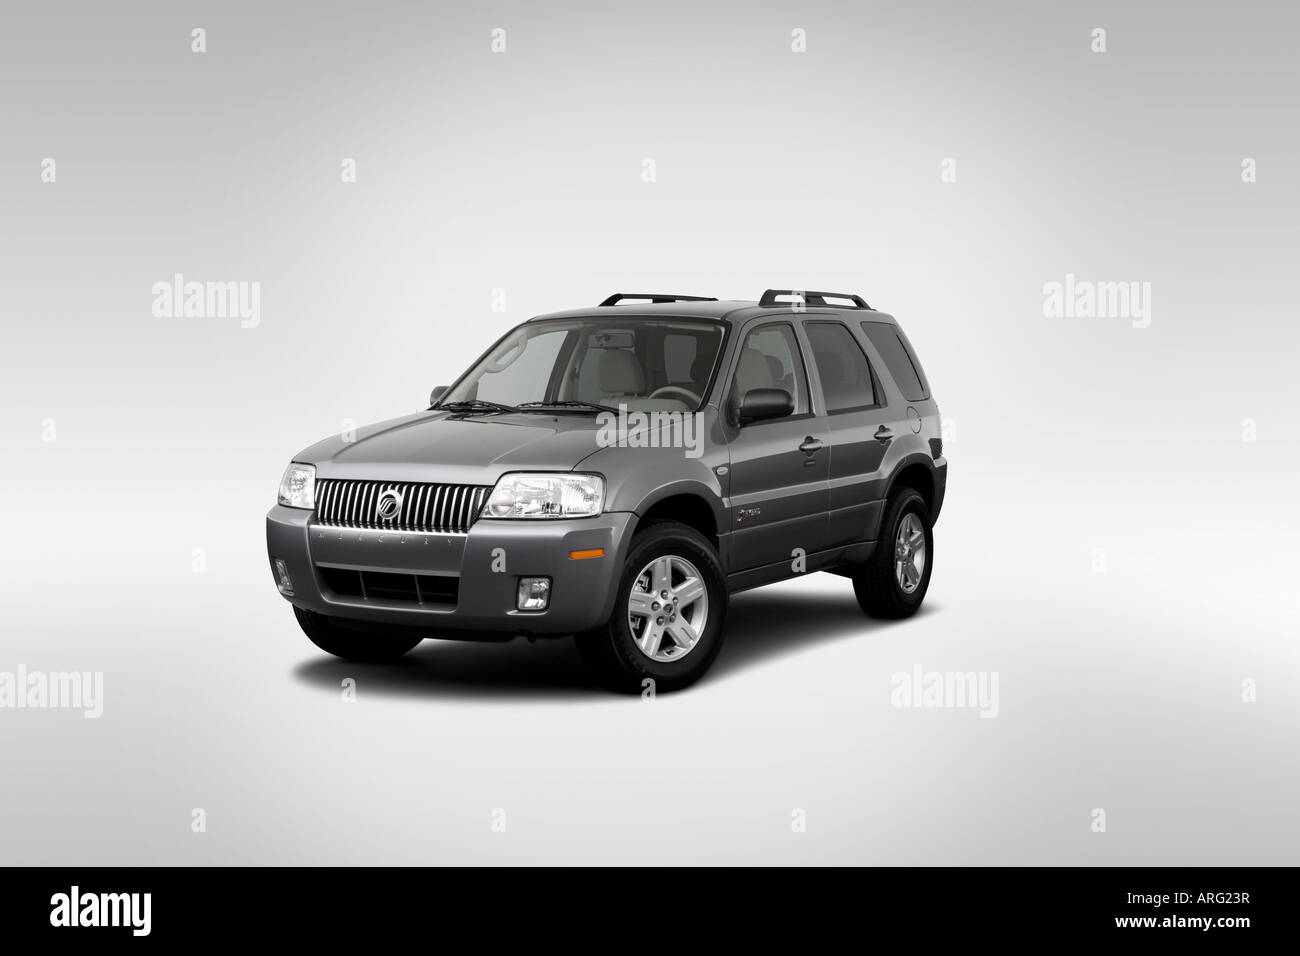 2007 Mercury Mariner Hybrid in Gray - Front angle view Stock Photo - Alamy